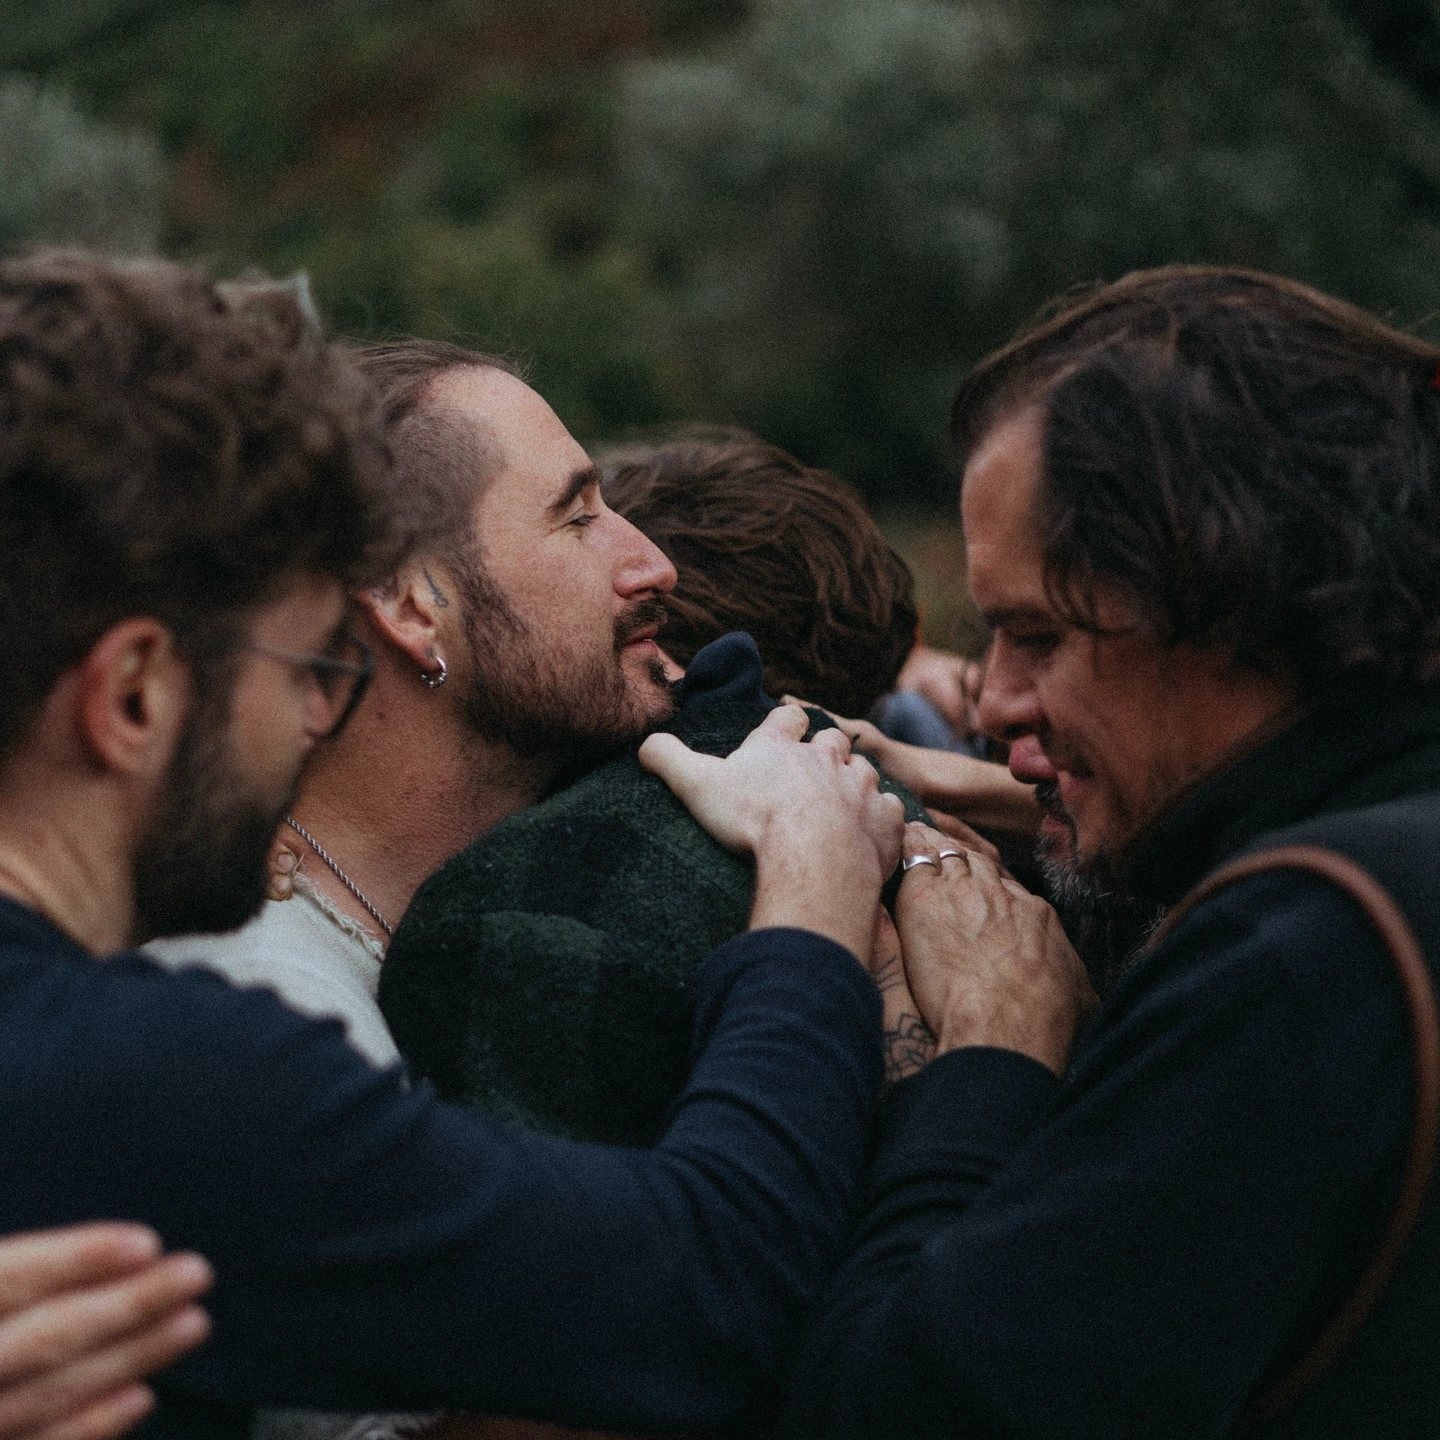 Participants bonding during a Menspedition event in Portugal. The wellness industry is waking up to men’s needs the way it has done to women’s – with emotional support groups and bonding retreats. 
Photo: Instagram/menspedition